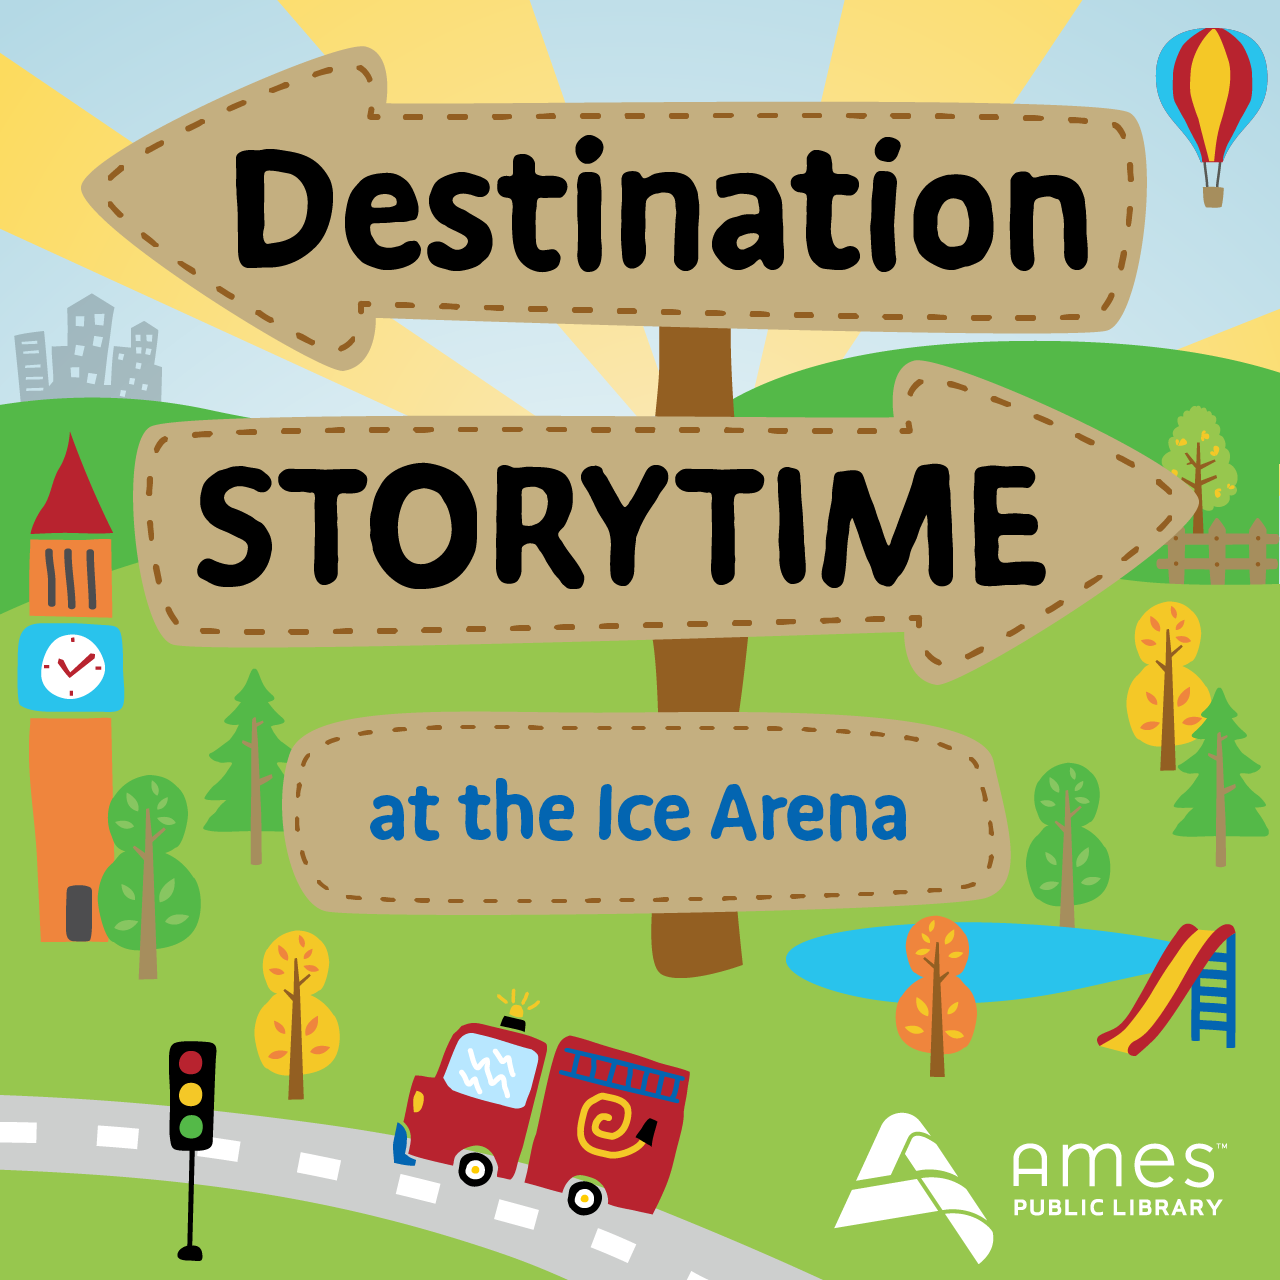 Destination Storytime at the Ice Arena